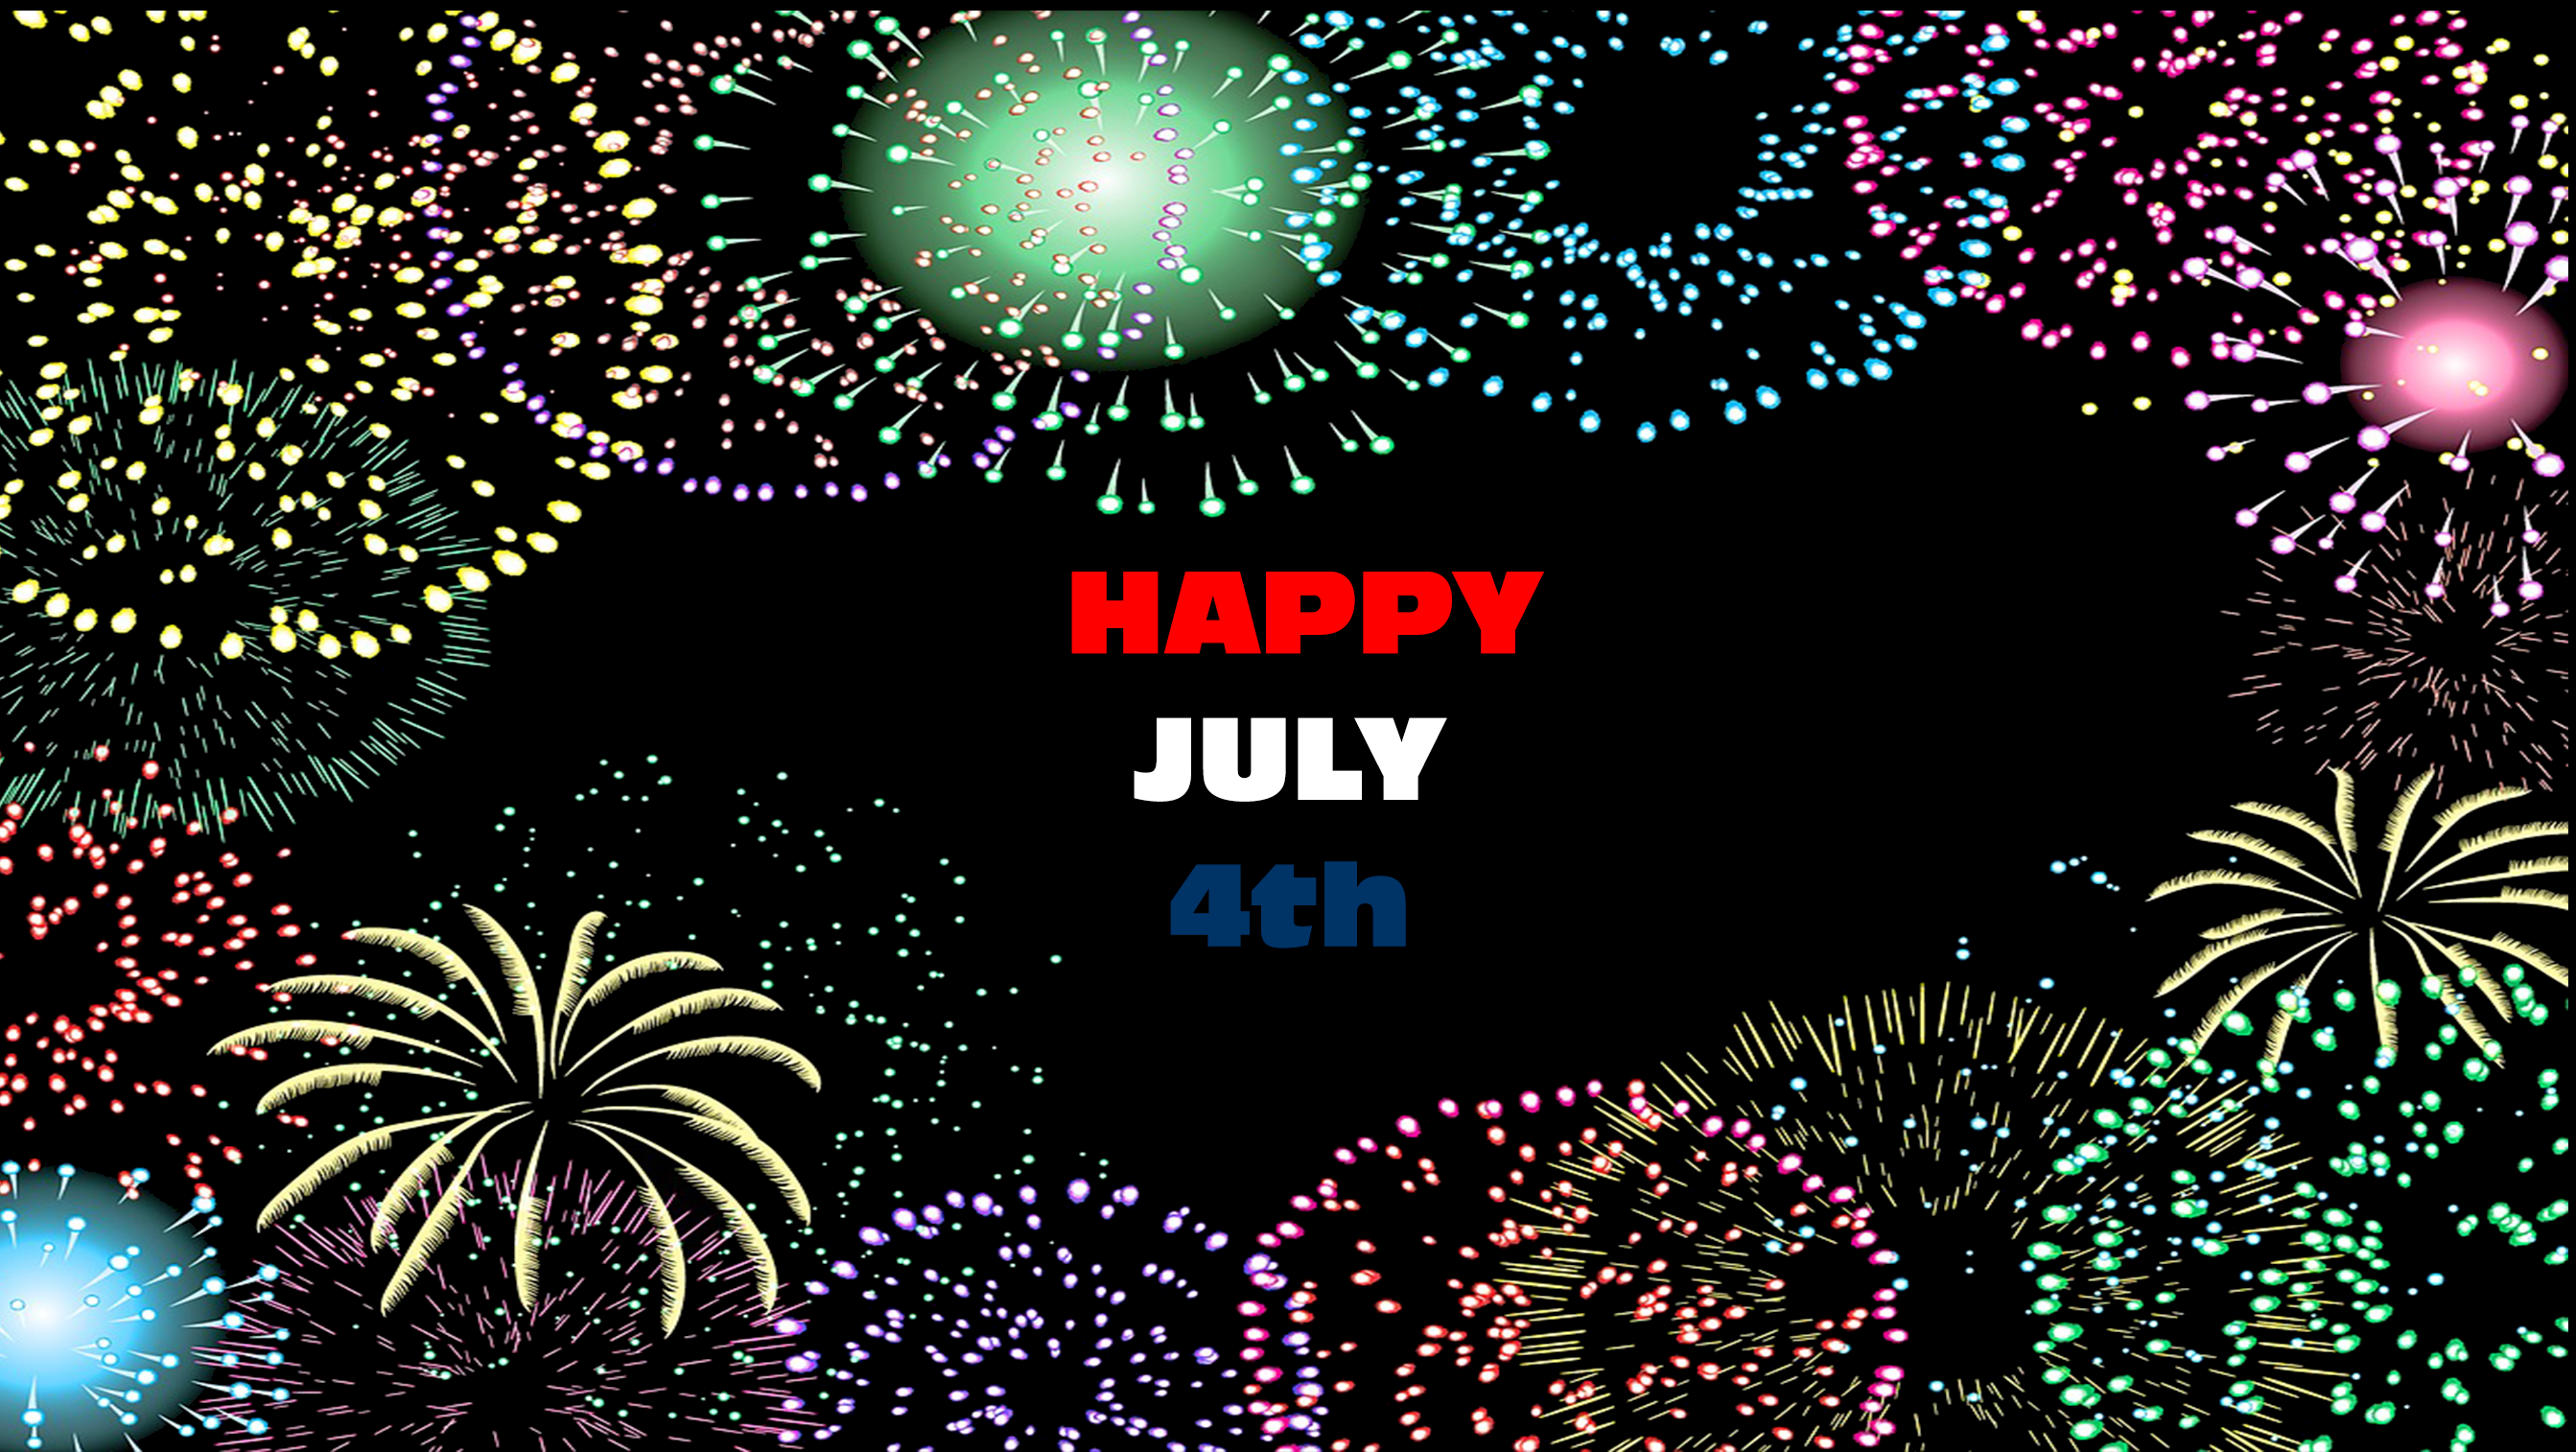 Happy July 4th -From THE COMiX NEWS WiRE.